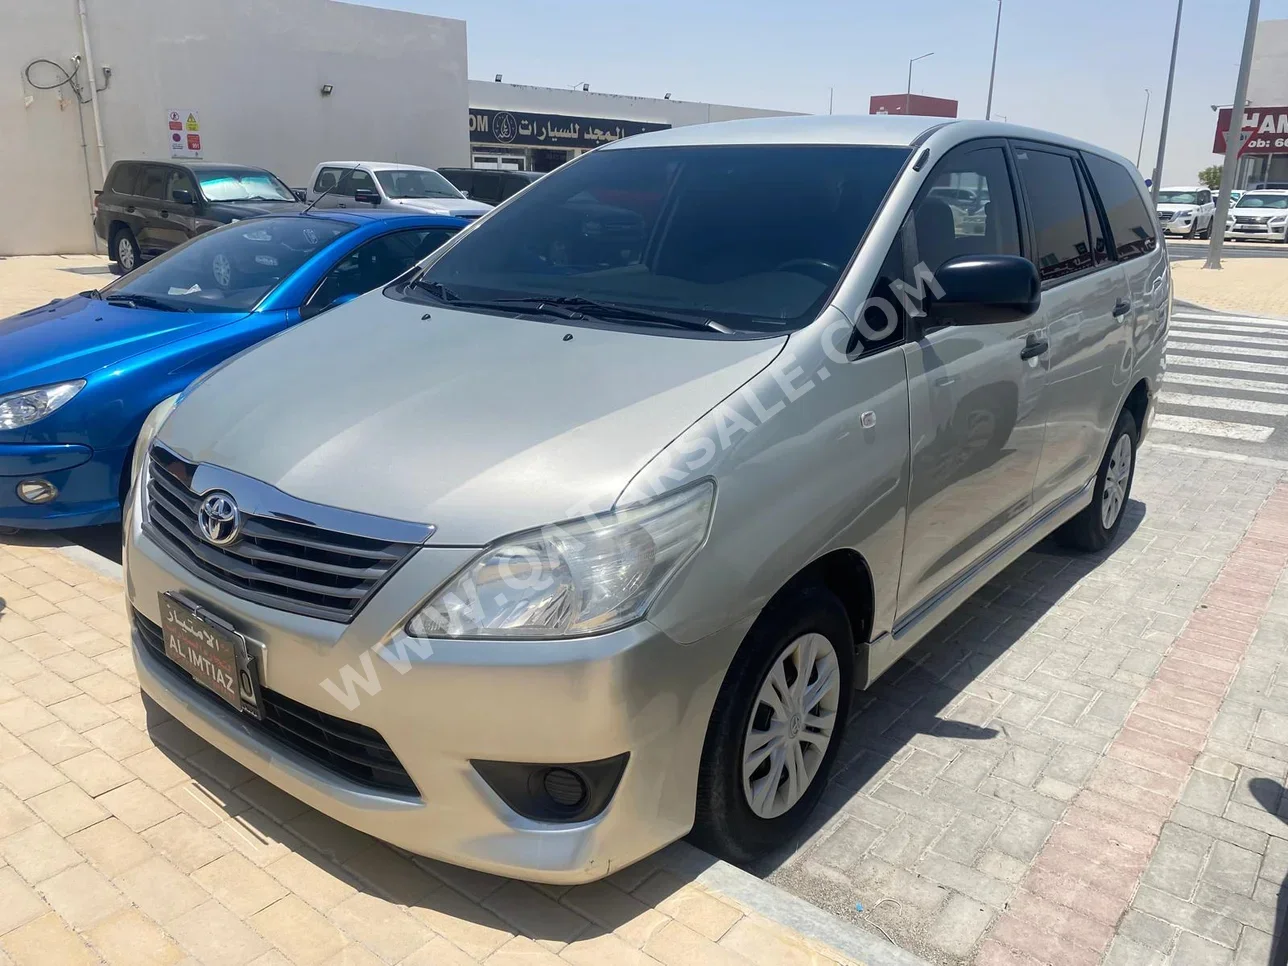 Toyota  Innova  2014  Automatic  127,000 Km  4 Cylinder  Front Wheel Drive (FWD)  Van / Bus  Silver